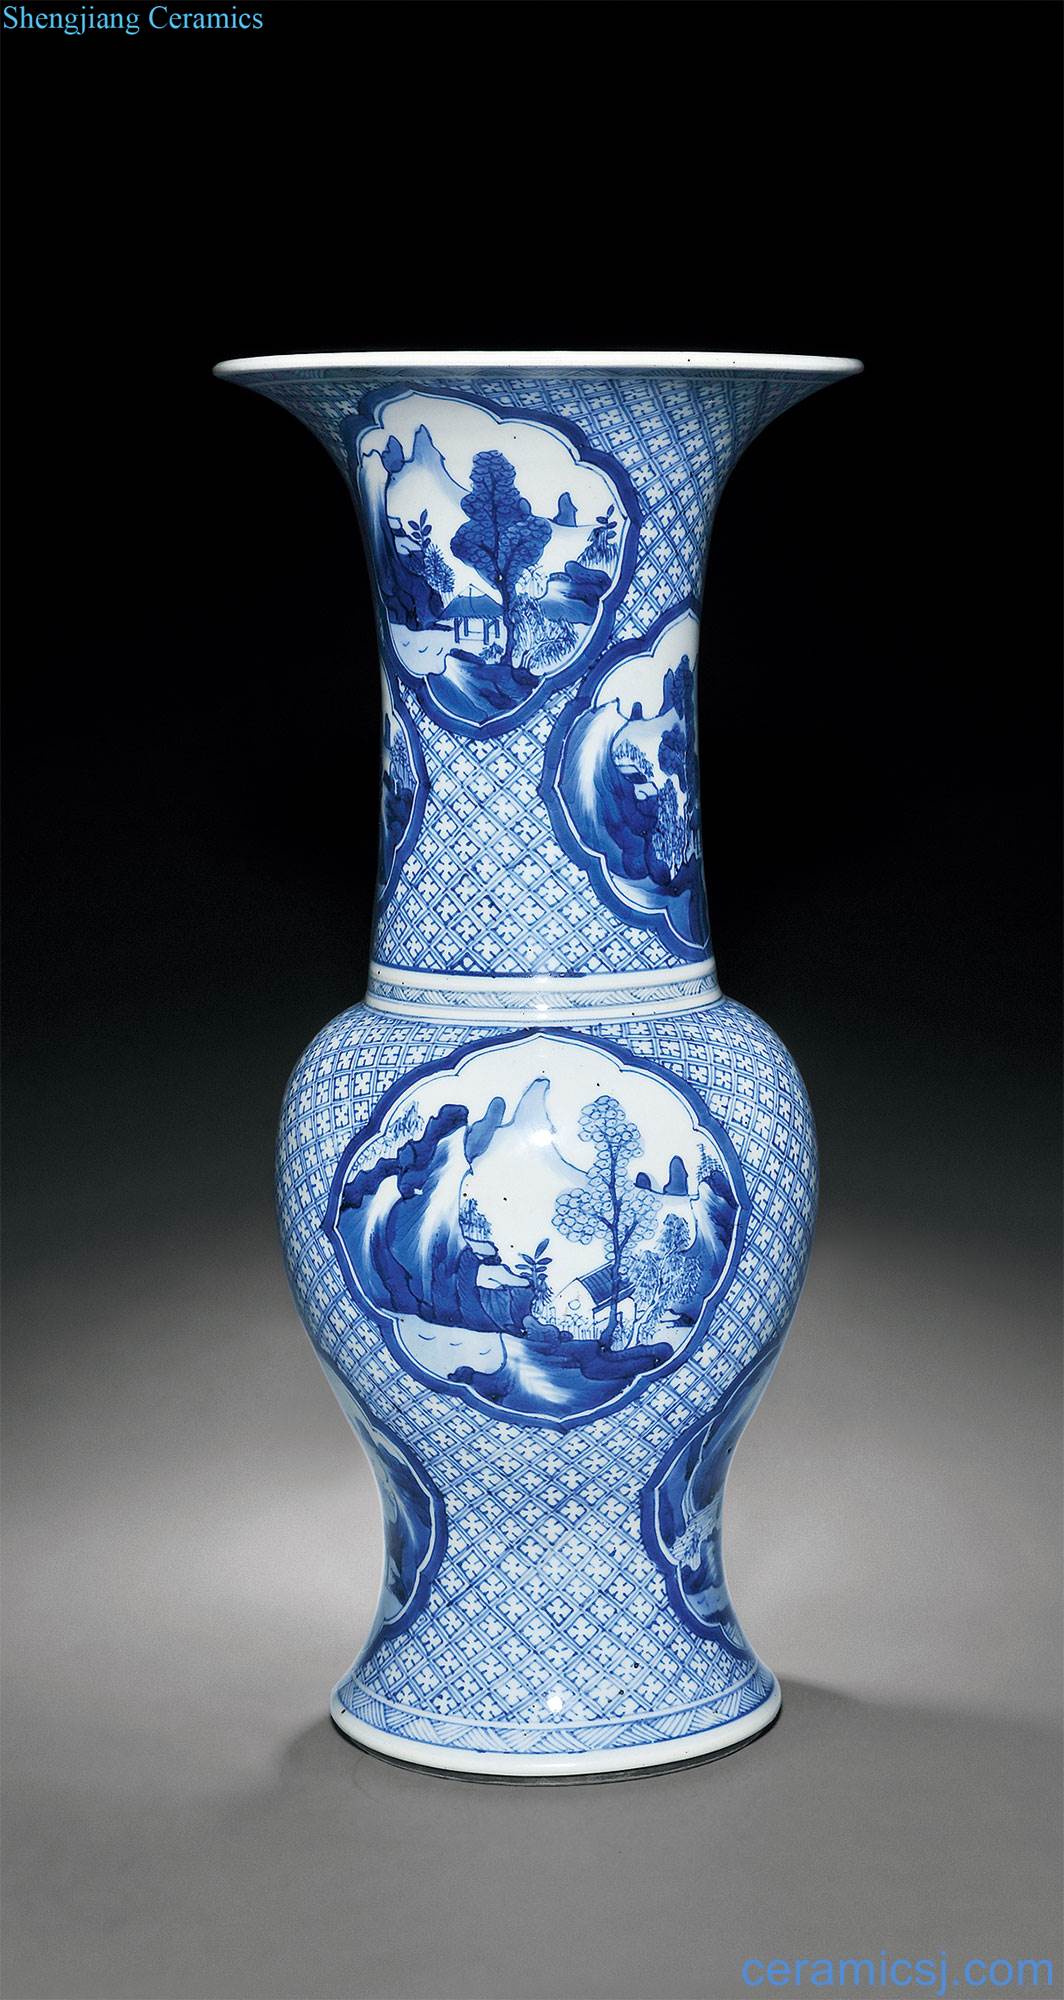 Blue and white brocade to medallion landscape characters of the reign of emperor kangxi grain PND tail-on statue